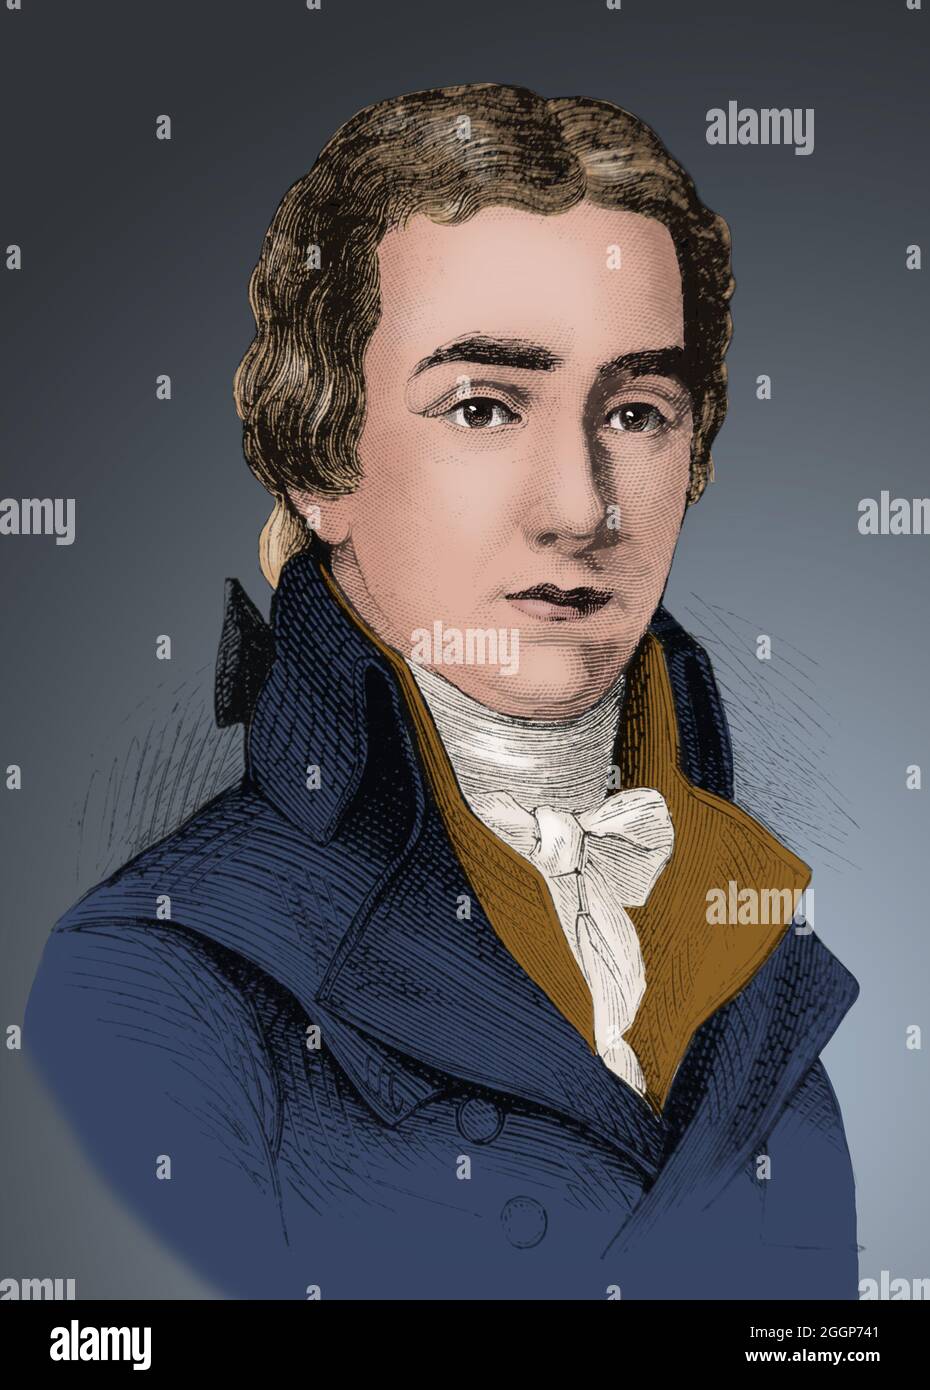 William Wilberforce (August 24, 1759 - July 29, 1833) was an English politician, philanthropist, and a leader of the movement to stop the slave trade. Stock Photo